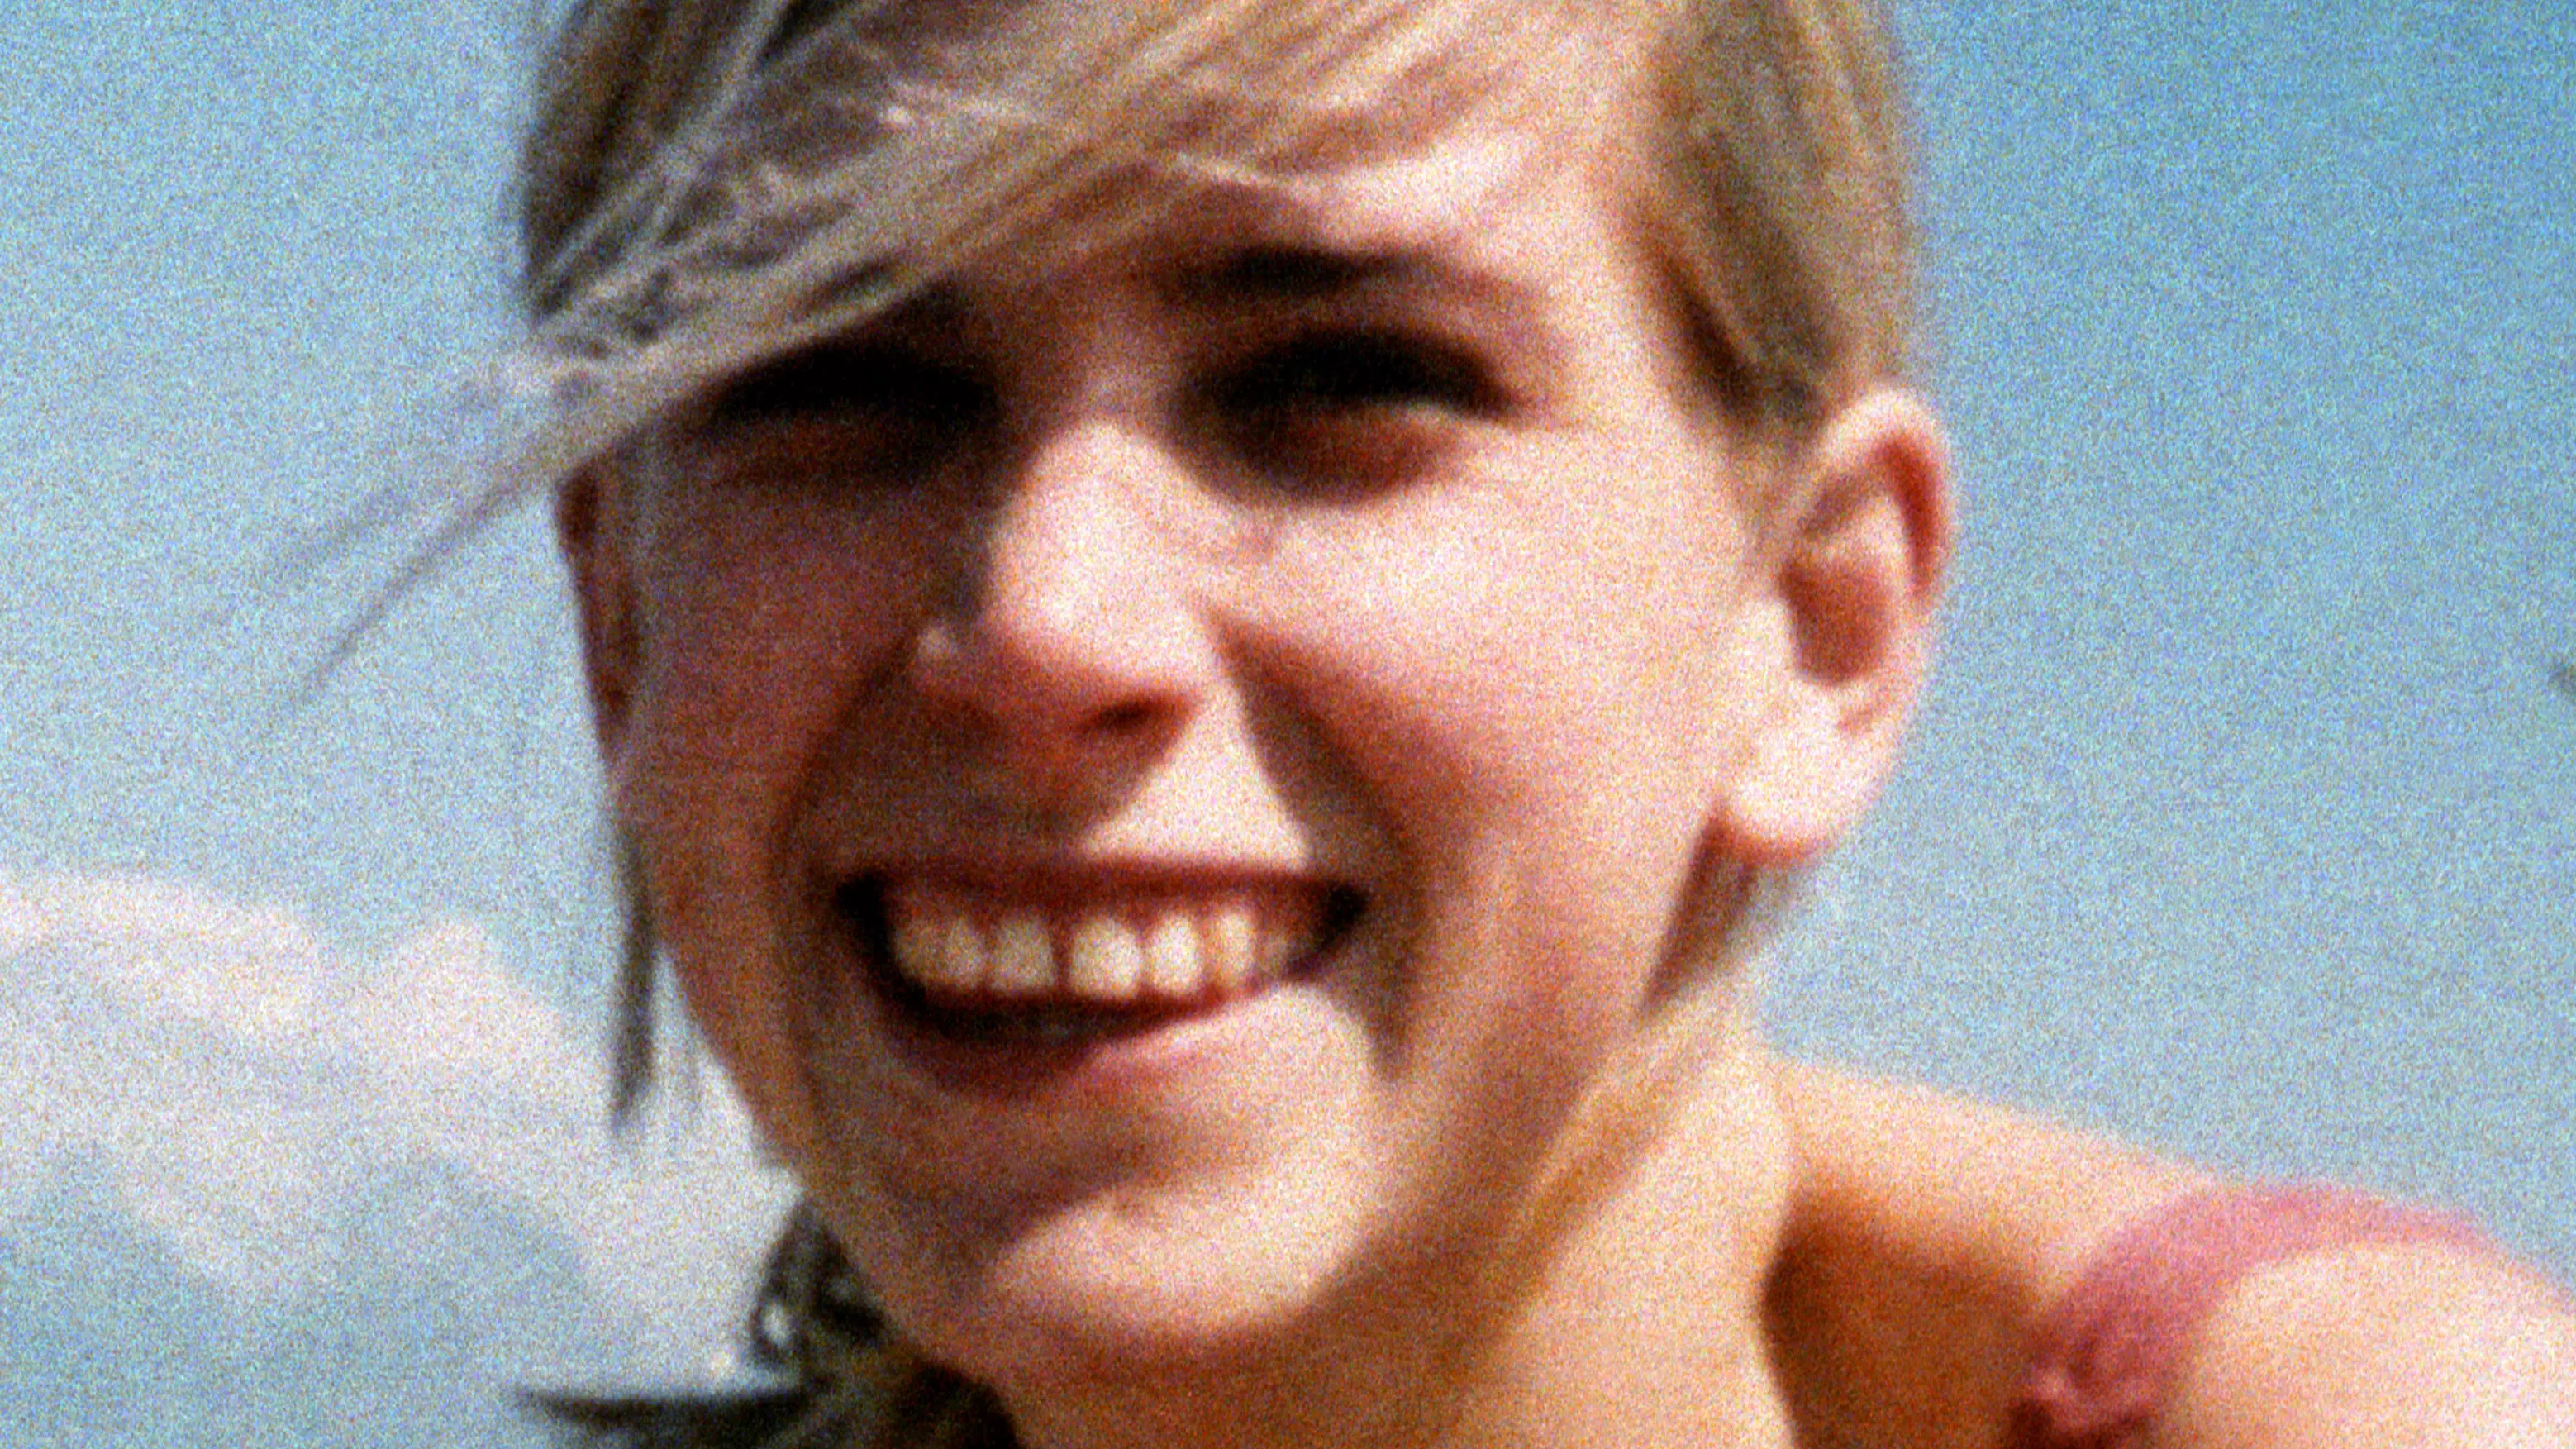 New Channel 4 Drama 'My Name is Lizzie' Will Revisit Murder Of Rachel Nickell